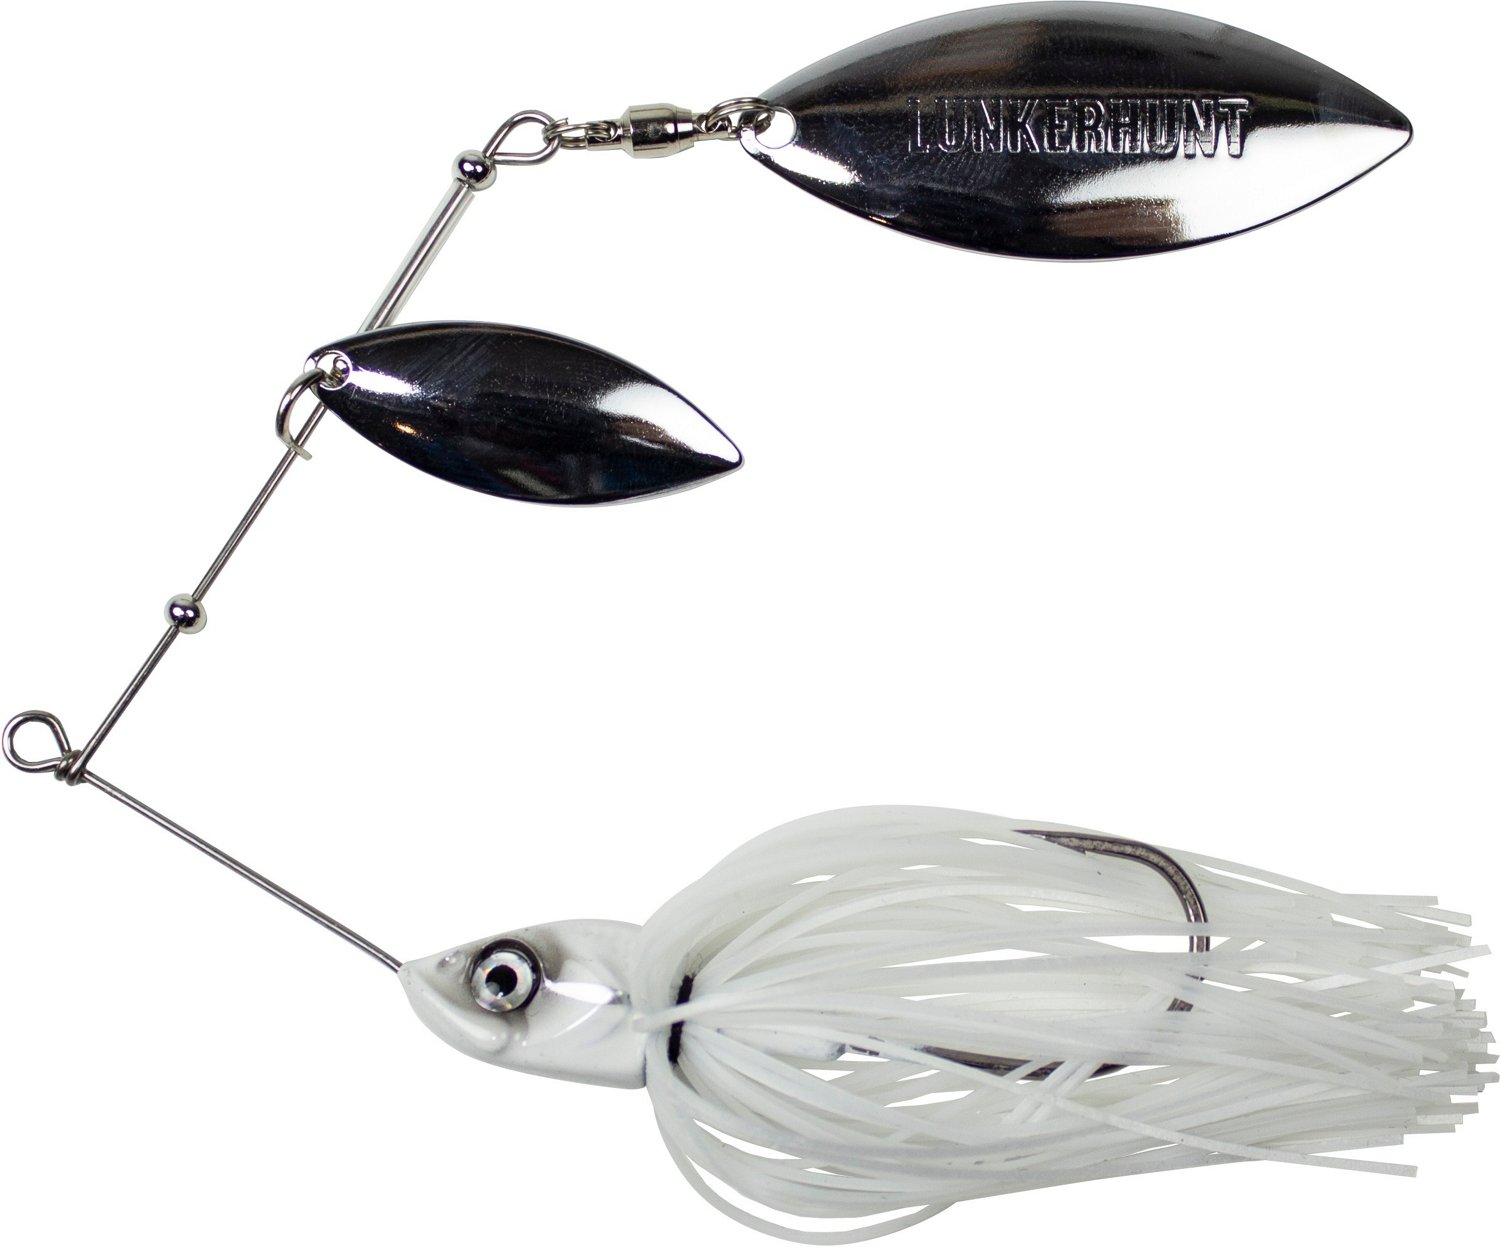 Academy Sports + Outdoors Lunkerhunt Impact Ignite Willow Leaf Spinnerbait